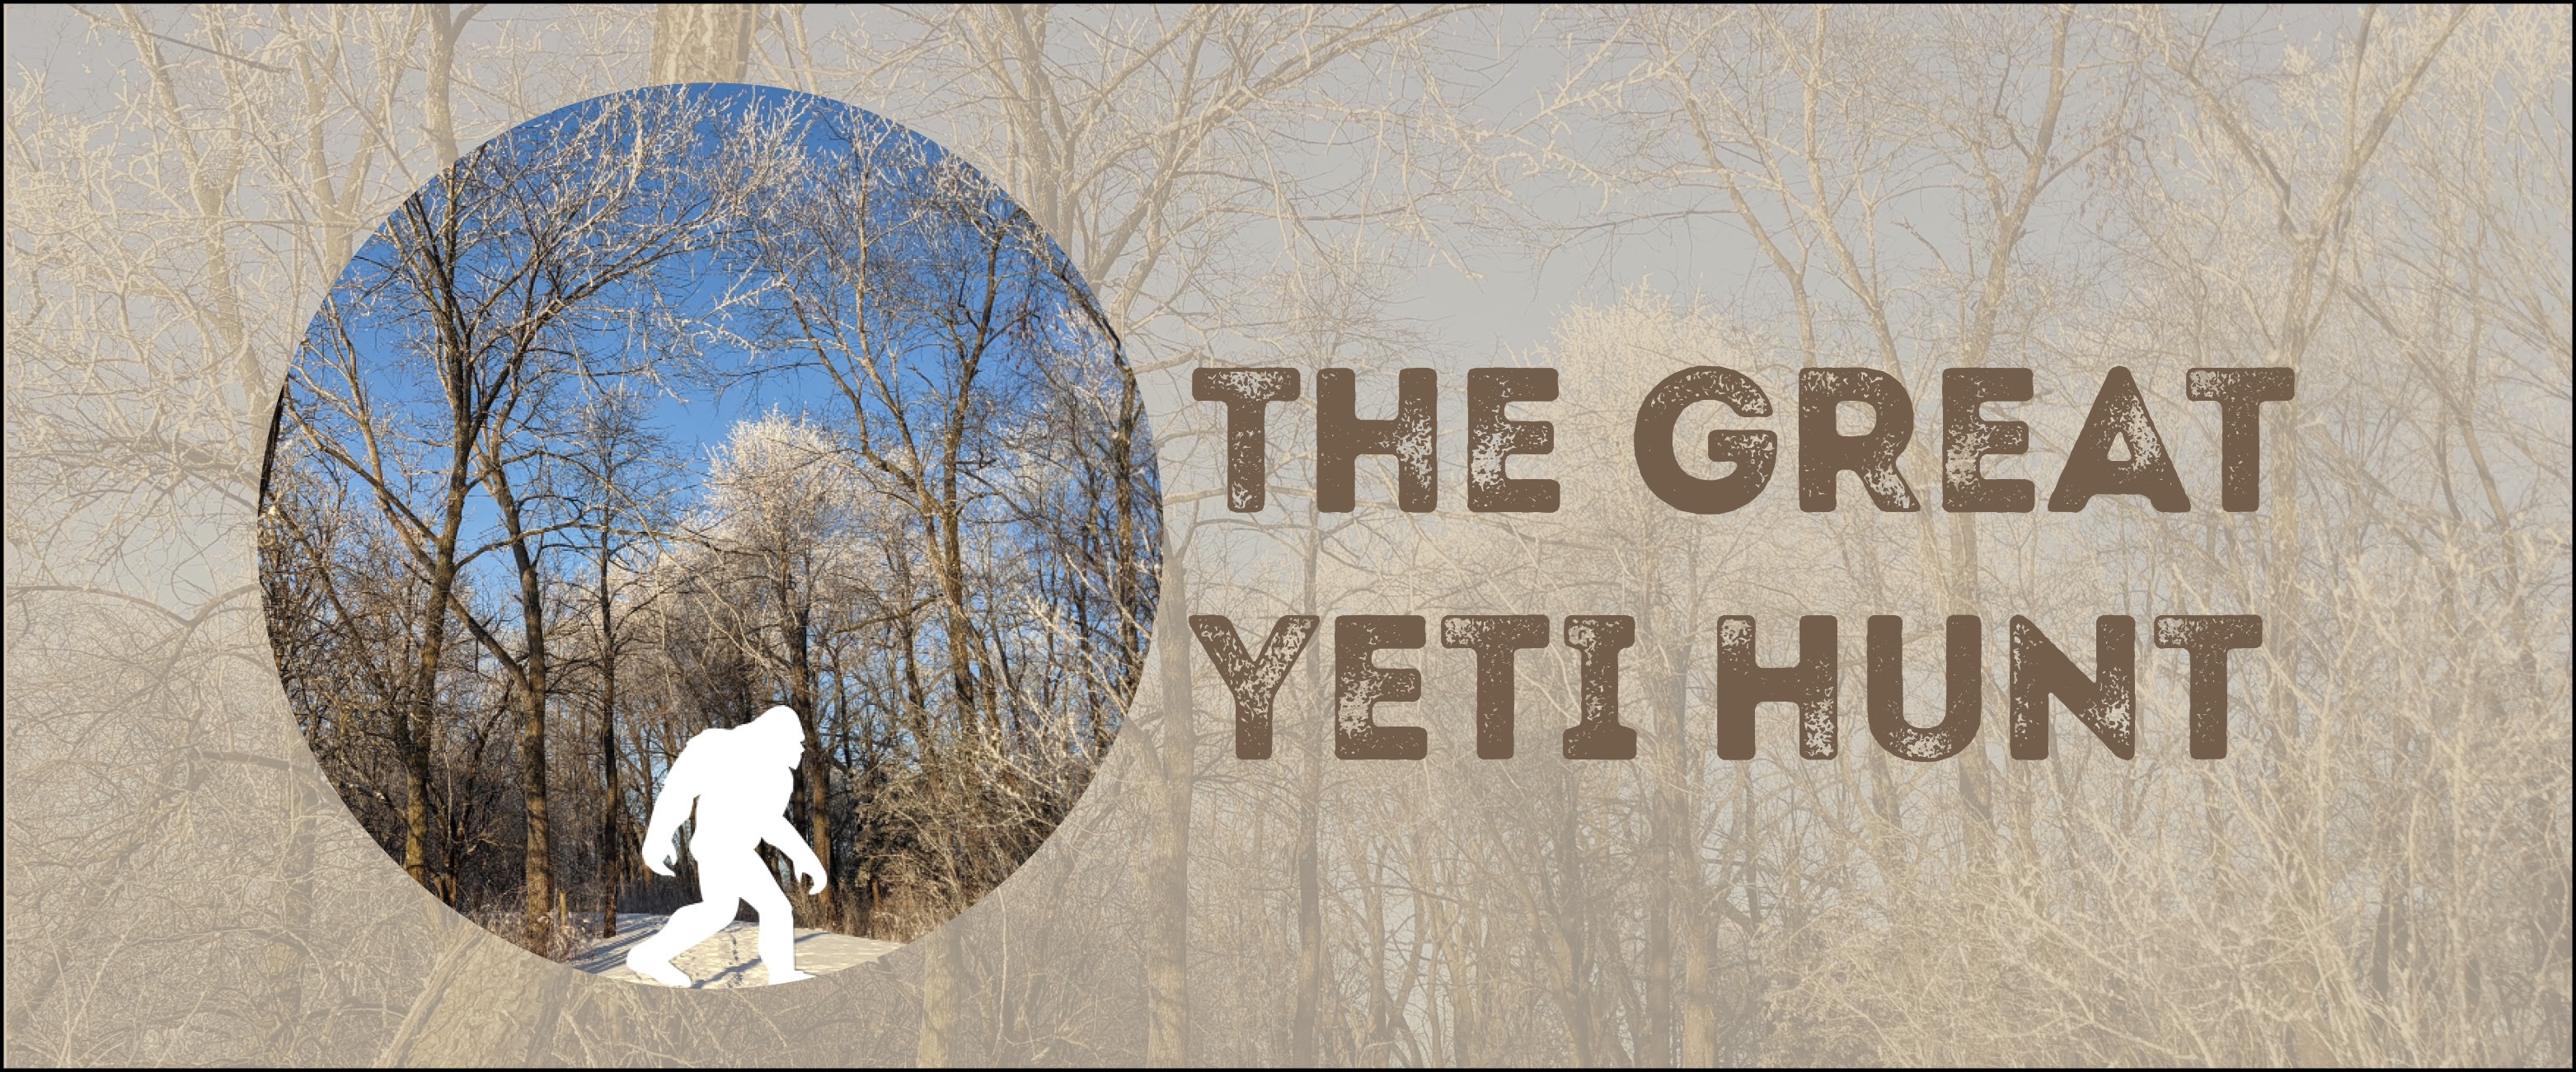 An event banner with a white sasquatch-shaped creature crossing a wooded trail with the text "The Great Yeti Hunt" across the front.